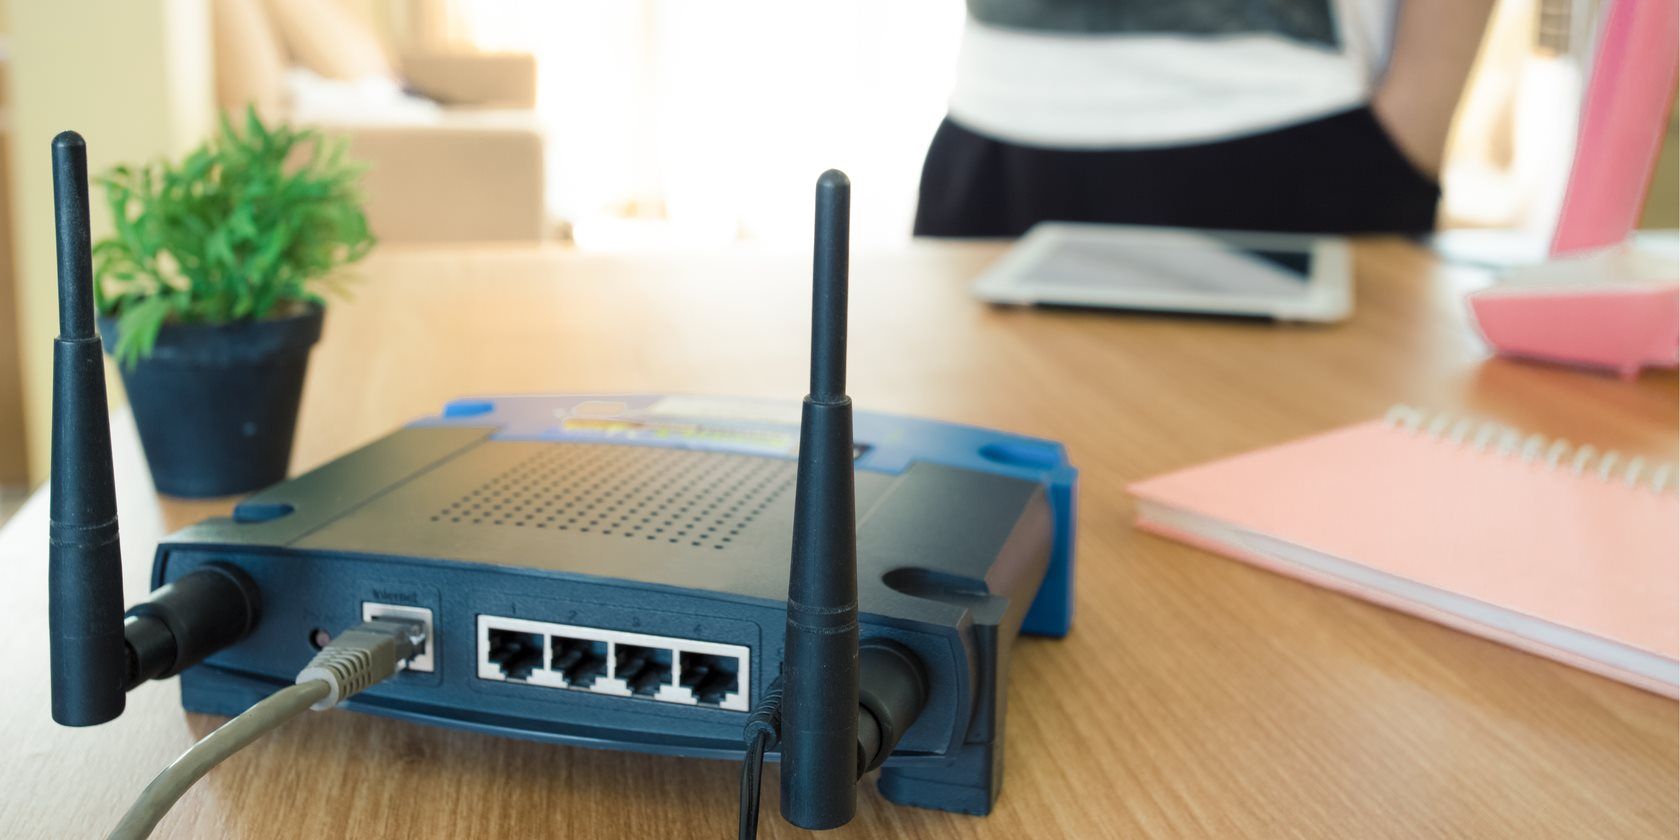 how-to-connect-wi-fi-router-to-landline-phone